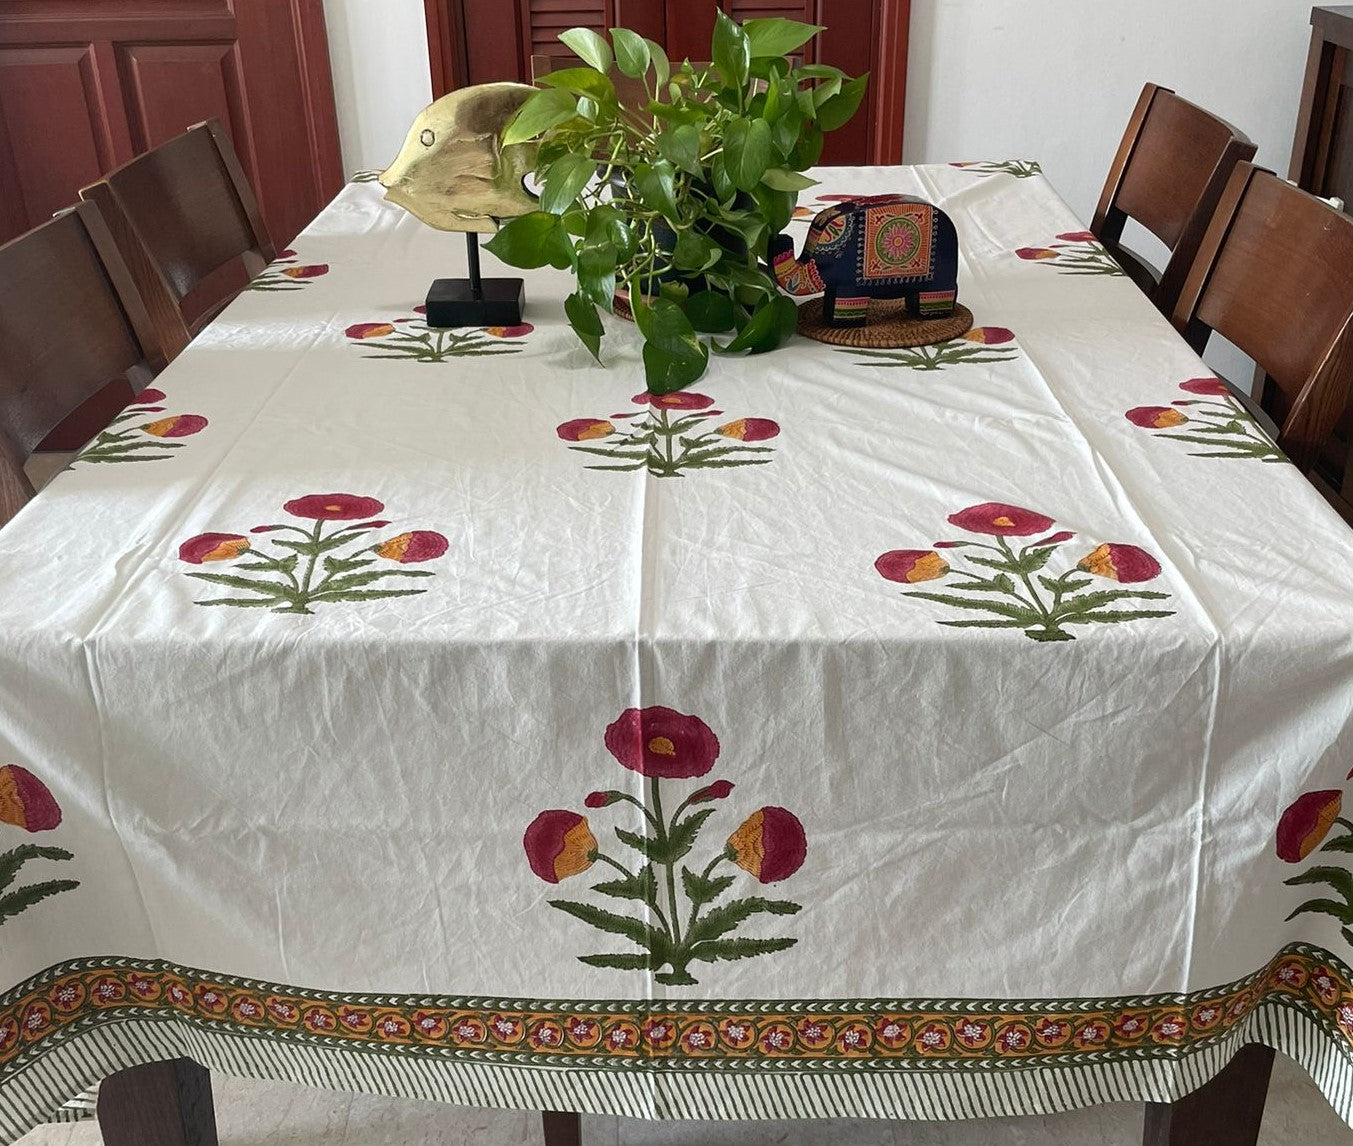 High quality and affordable table cover in white and brown for dining table